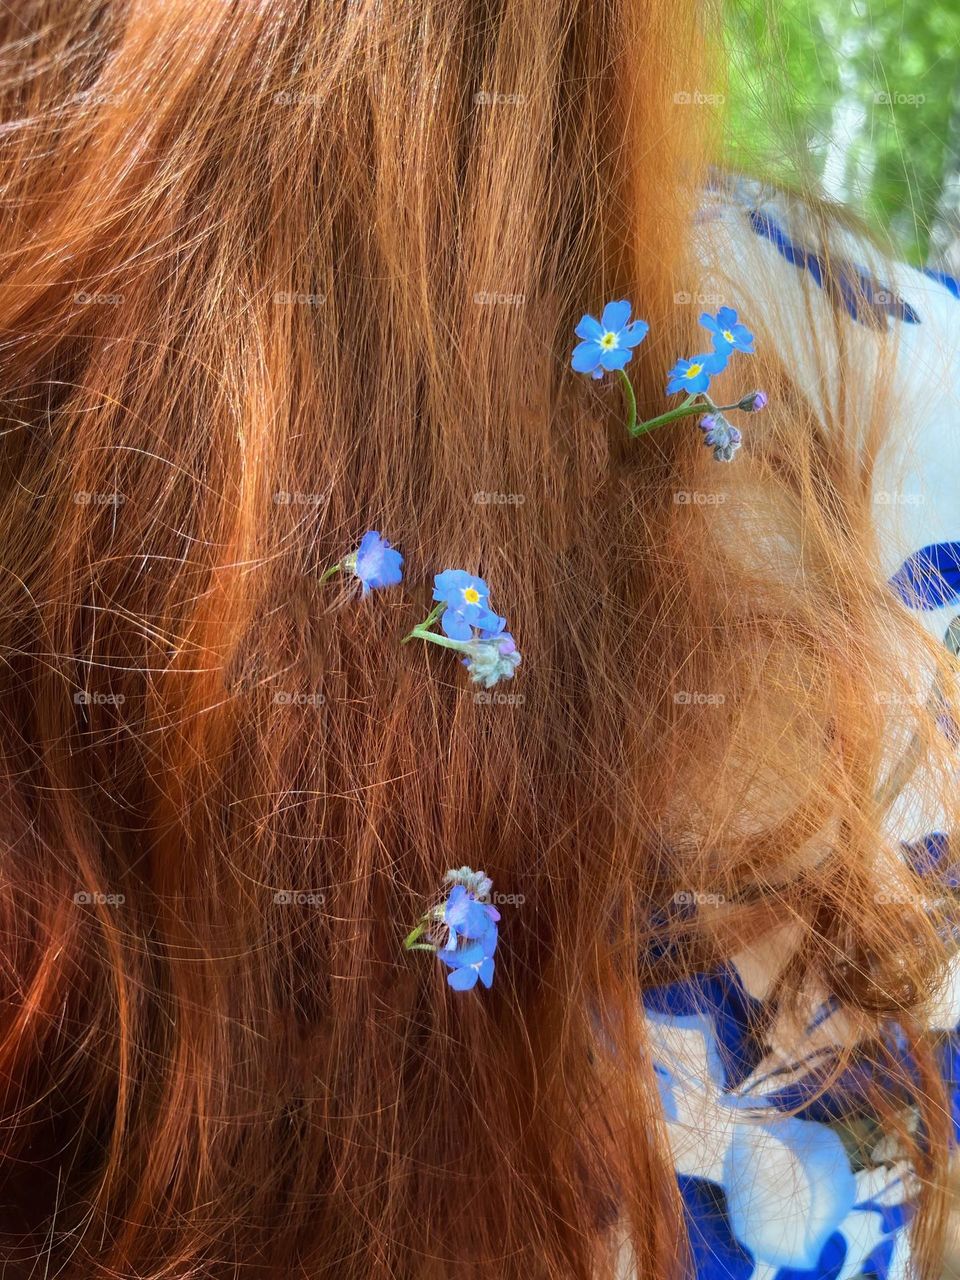 Forget-me-nots in my hair